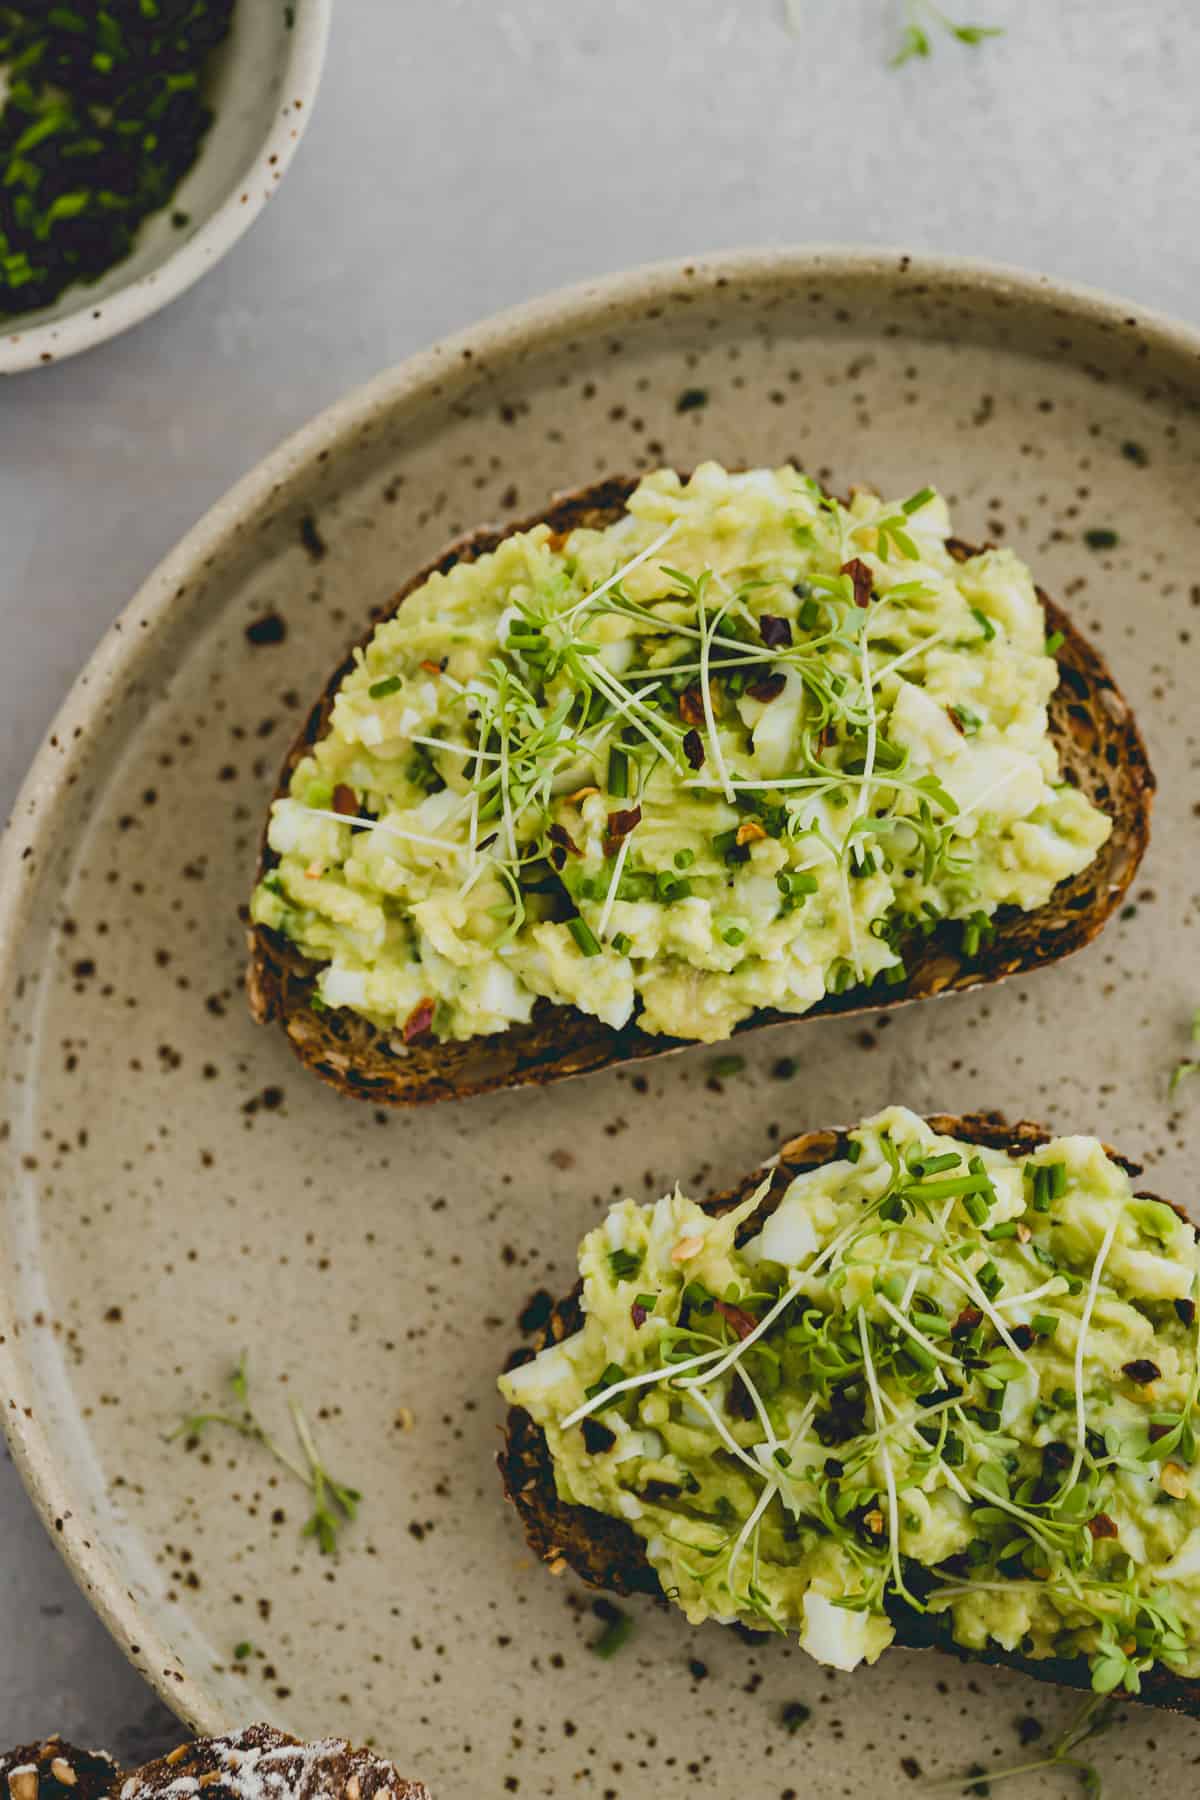 Avocado Egg Salad served on bread and garnished with microgreens